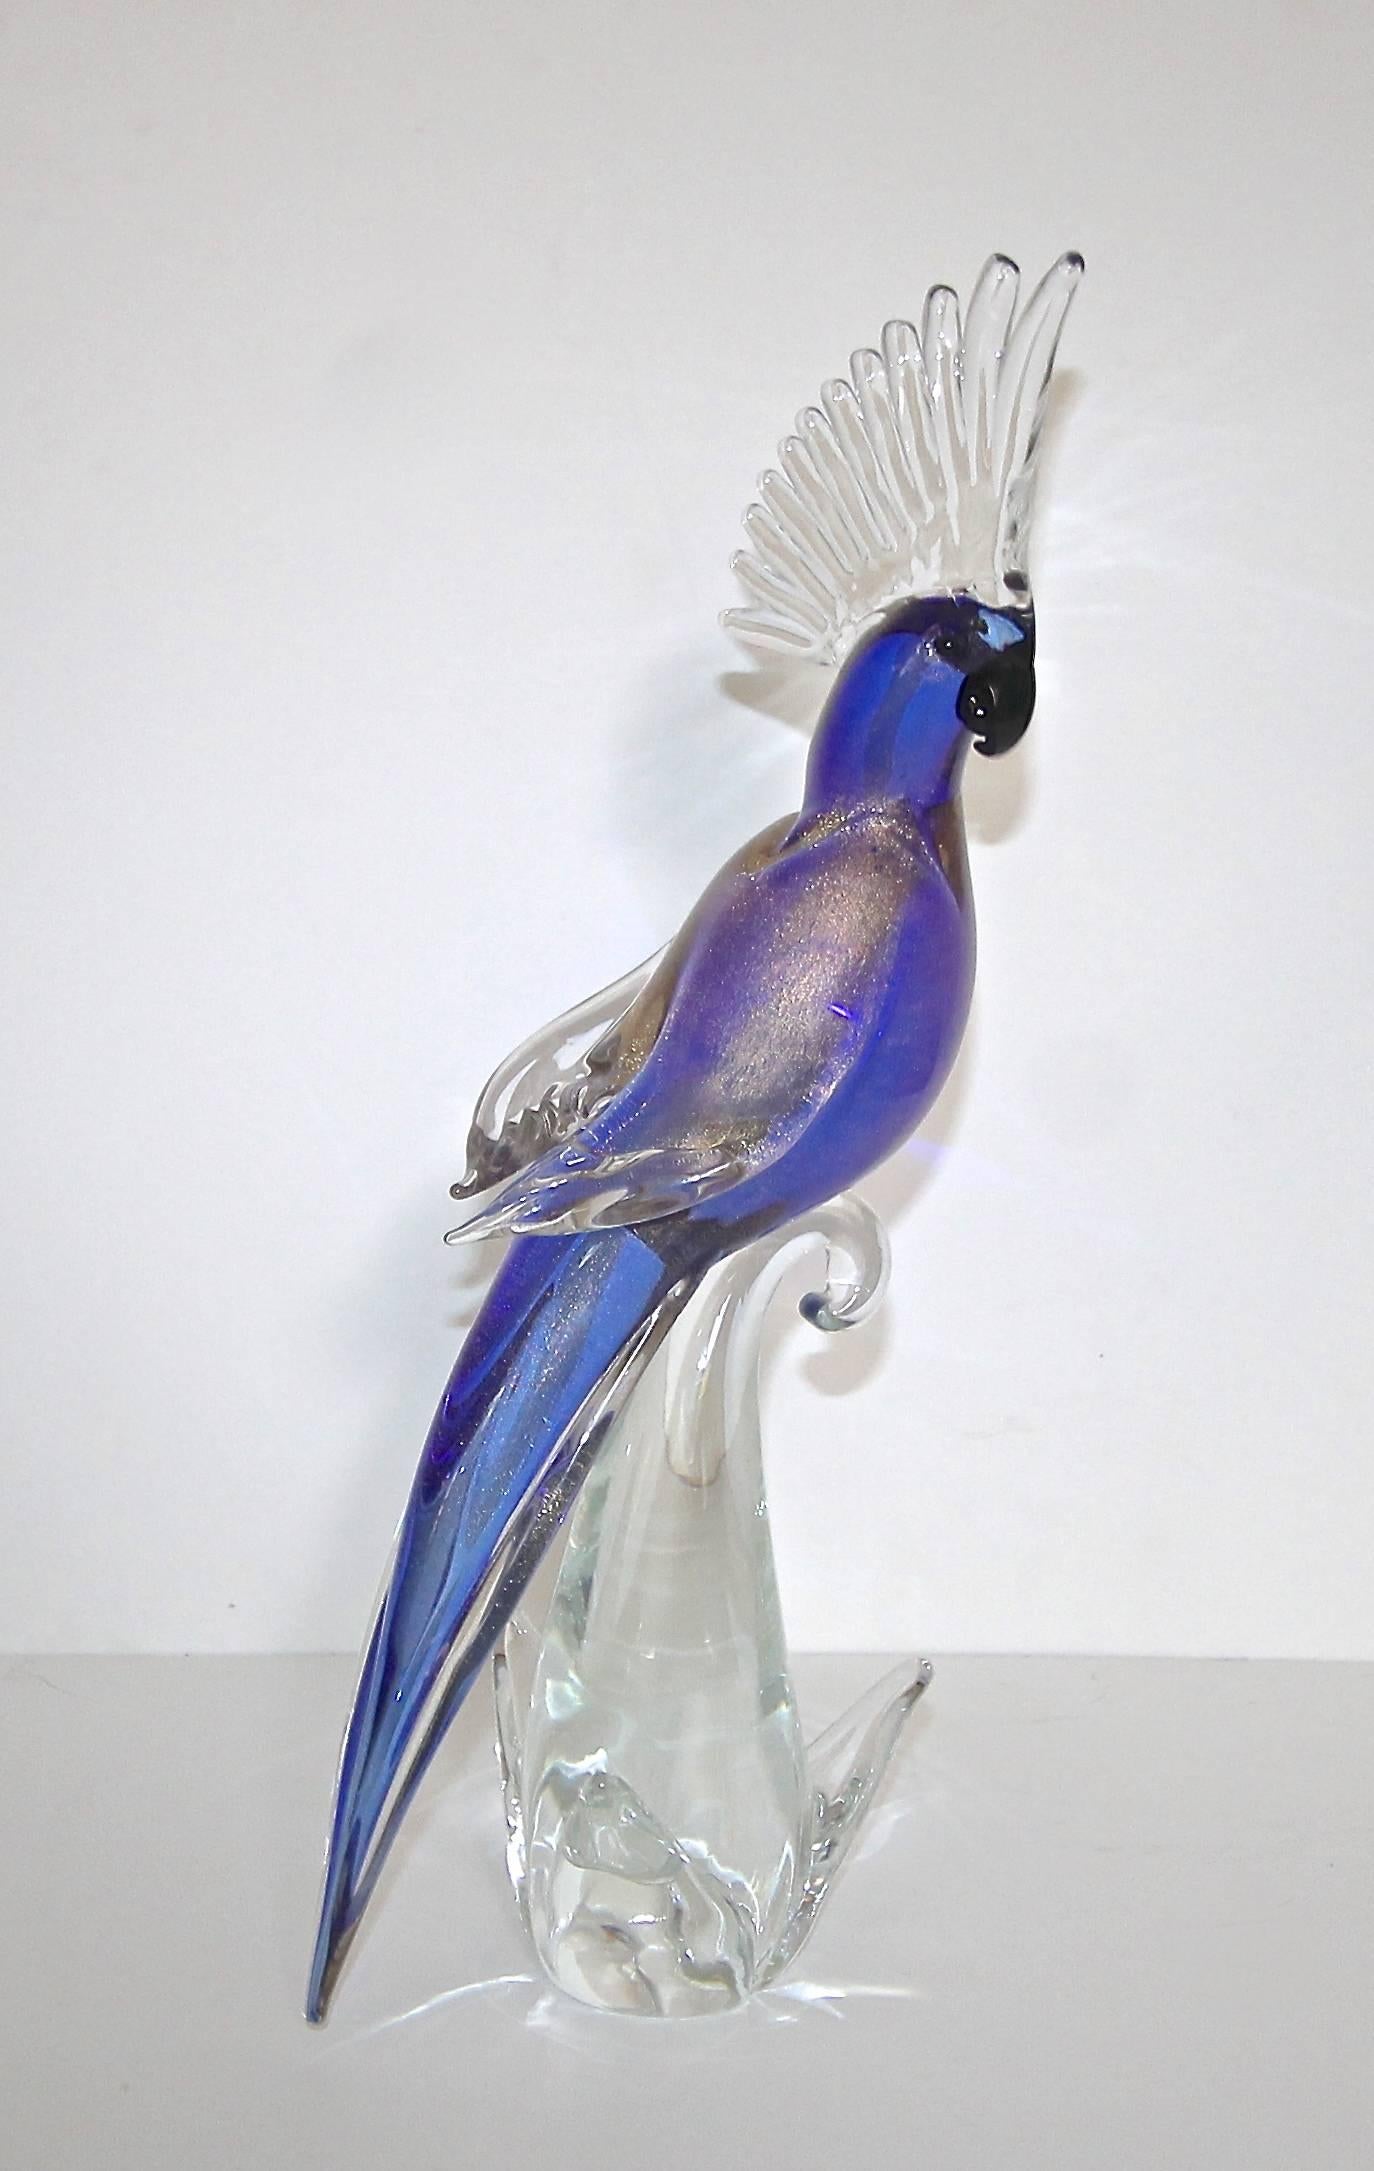 Large Italian Murano handblown glass cockatoo in clear and vibrant blues and soft purples with gold inclusions on wings. Beautifully crafted.